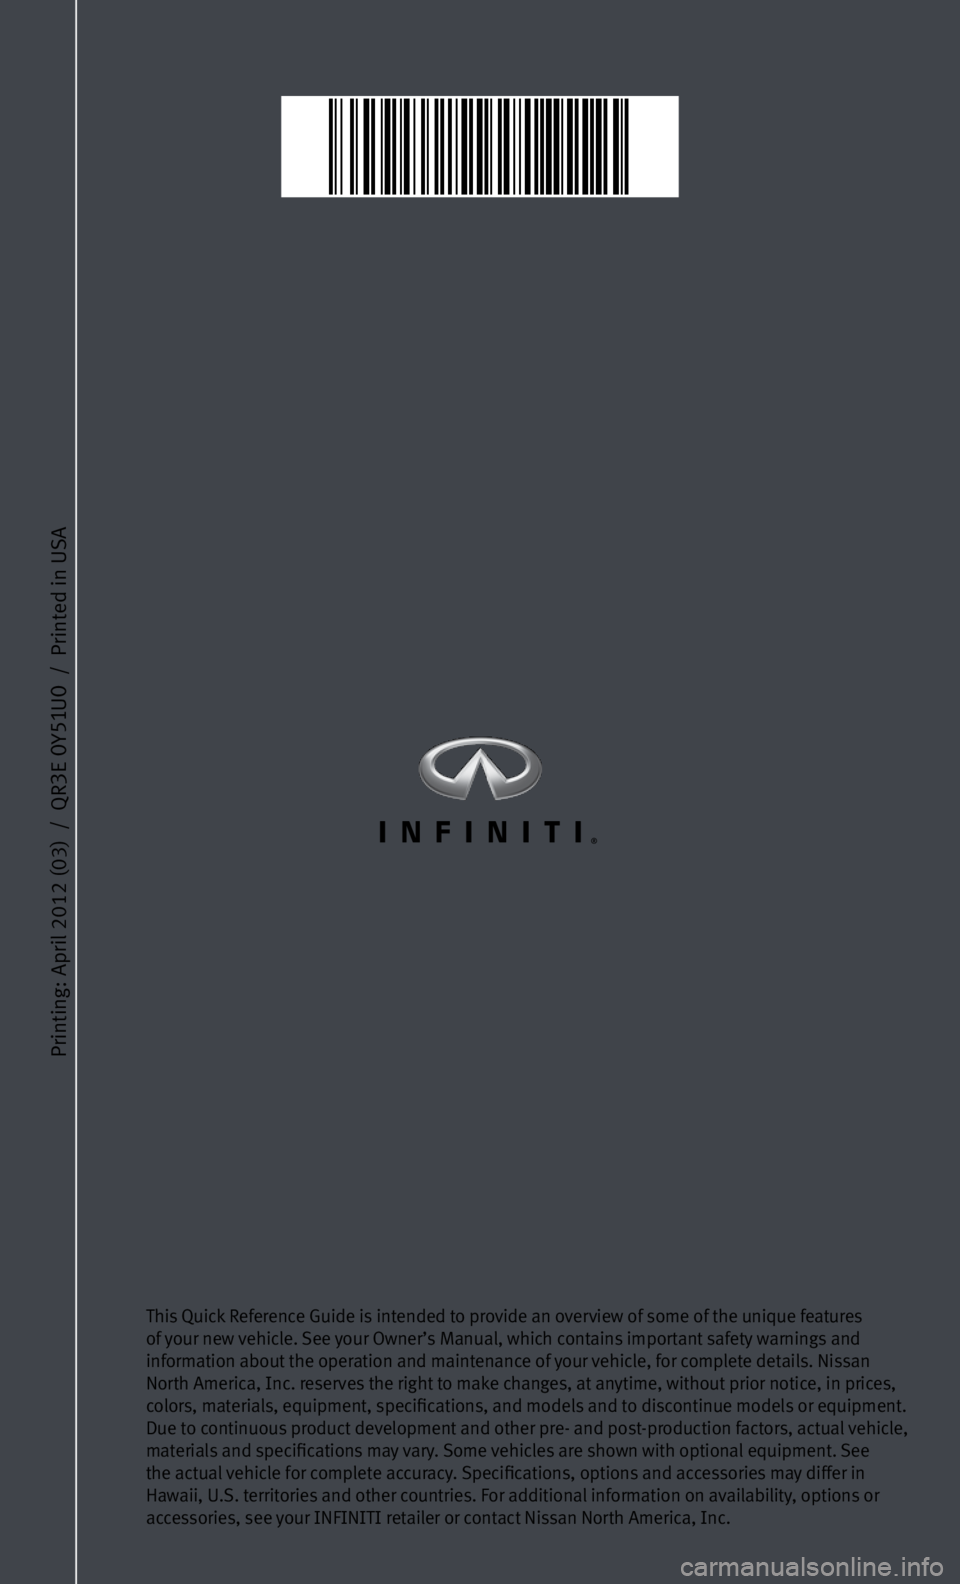 INFINITI M 2013  Quick Reference Guide printing: April 2012 (03)  /  QR
3e 0y51u0  /  printed in uSA
this Quick Reference Guide is intended to provide an overview of some of the unique features 
of your new vehicle. See your Owner’s Manu